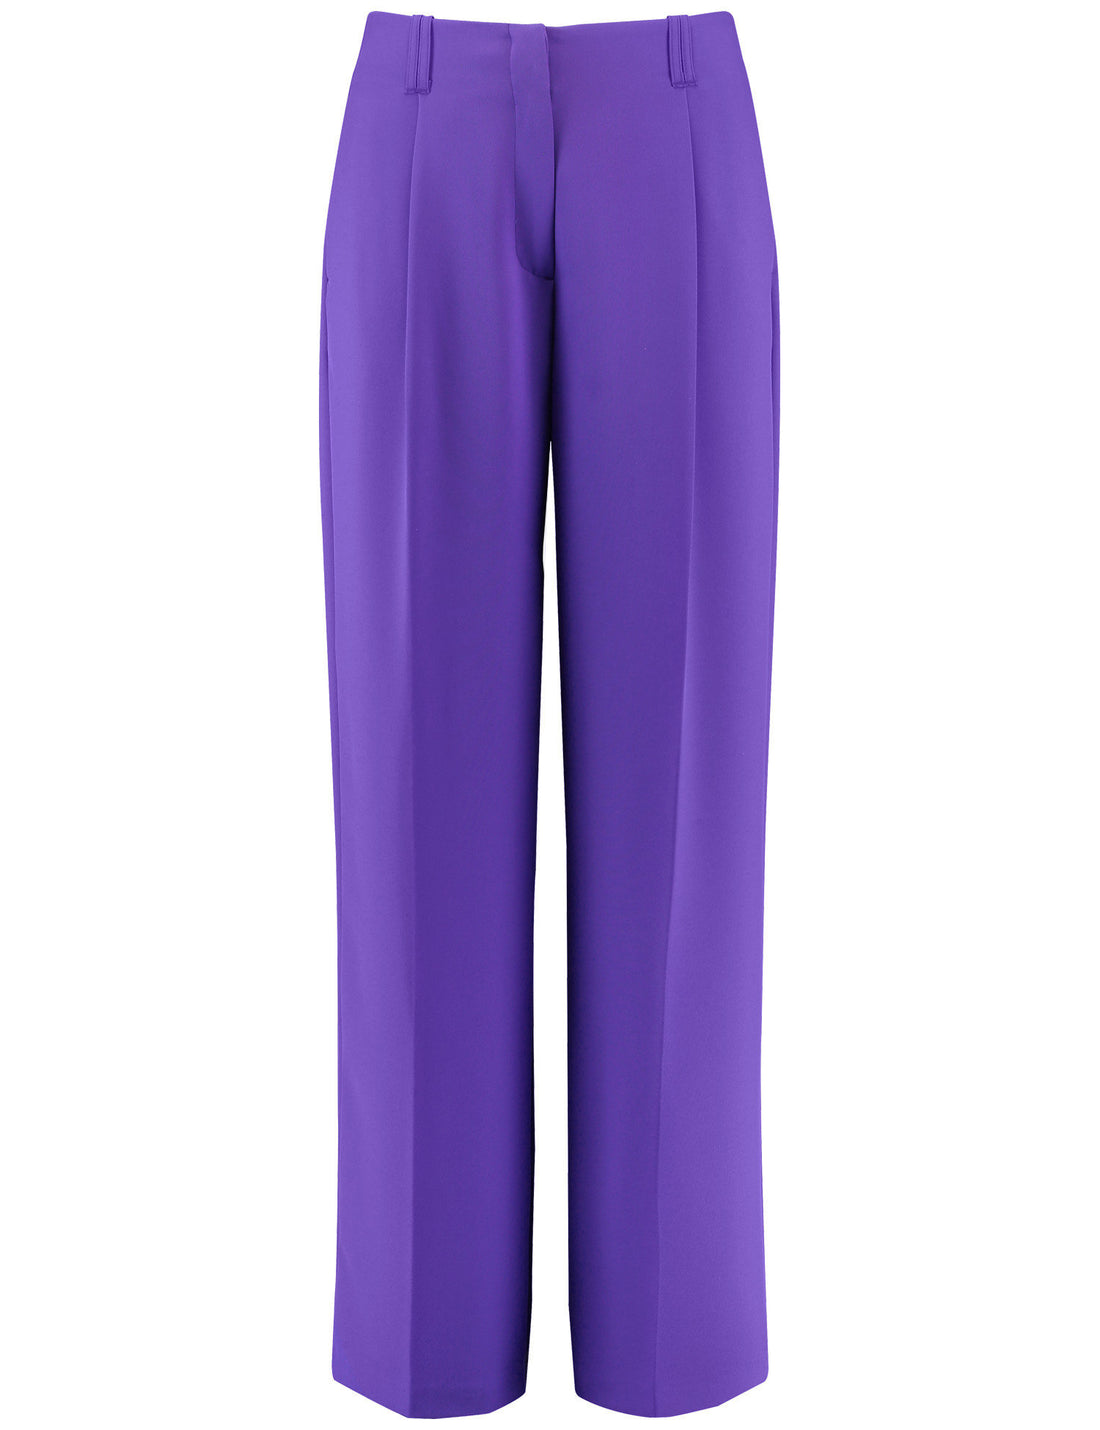 Elegant Wide-Leg Trousers Made Of Stretch Fabric_520303-11054_8810_02